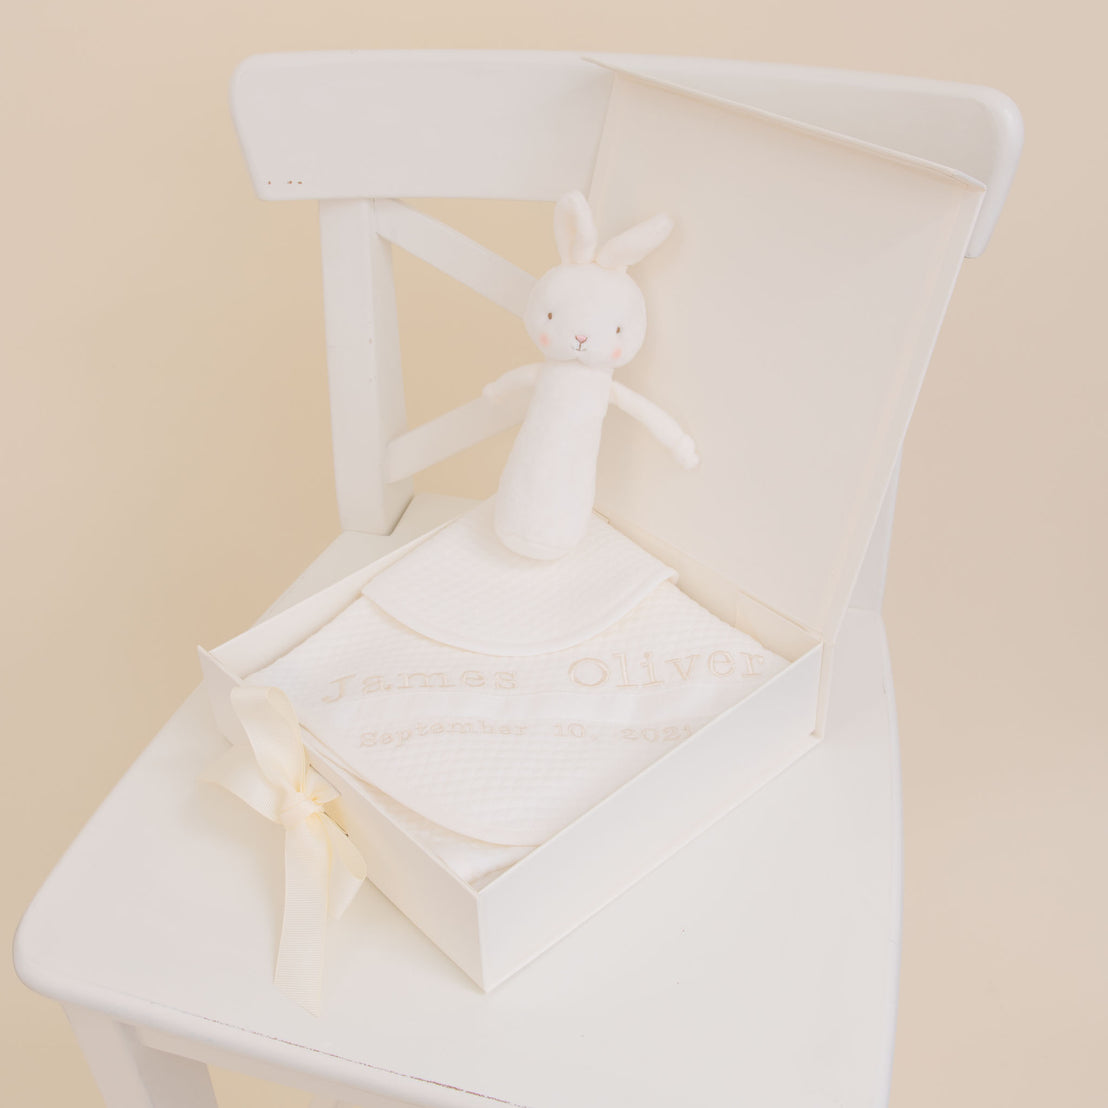 A white Baby Beau & Belle keepsake box on a chair, personalized with "James Oliver" and a date, containing an album and a stuffed rabbit. The box, an embroidered Baby Beau & Belle keepsake, is adorned with a ribbon.